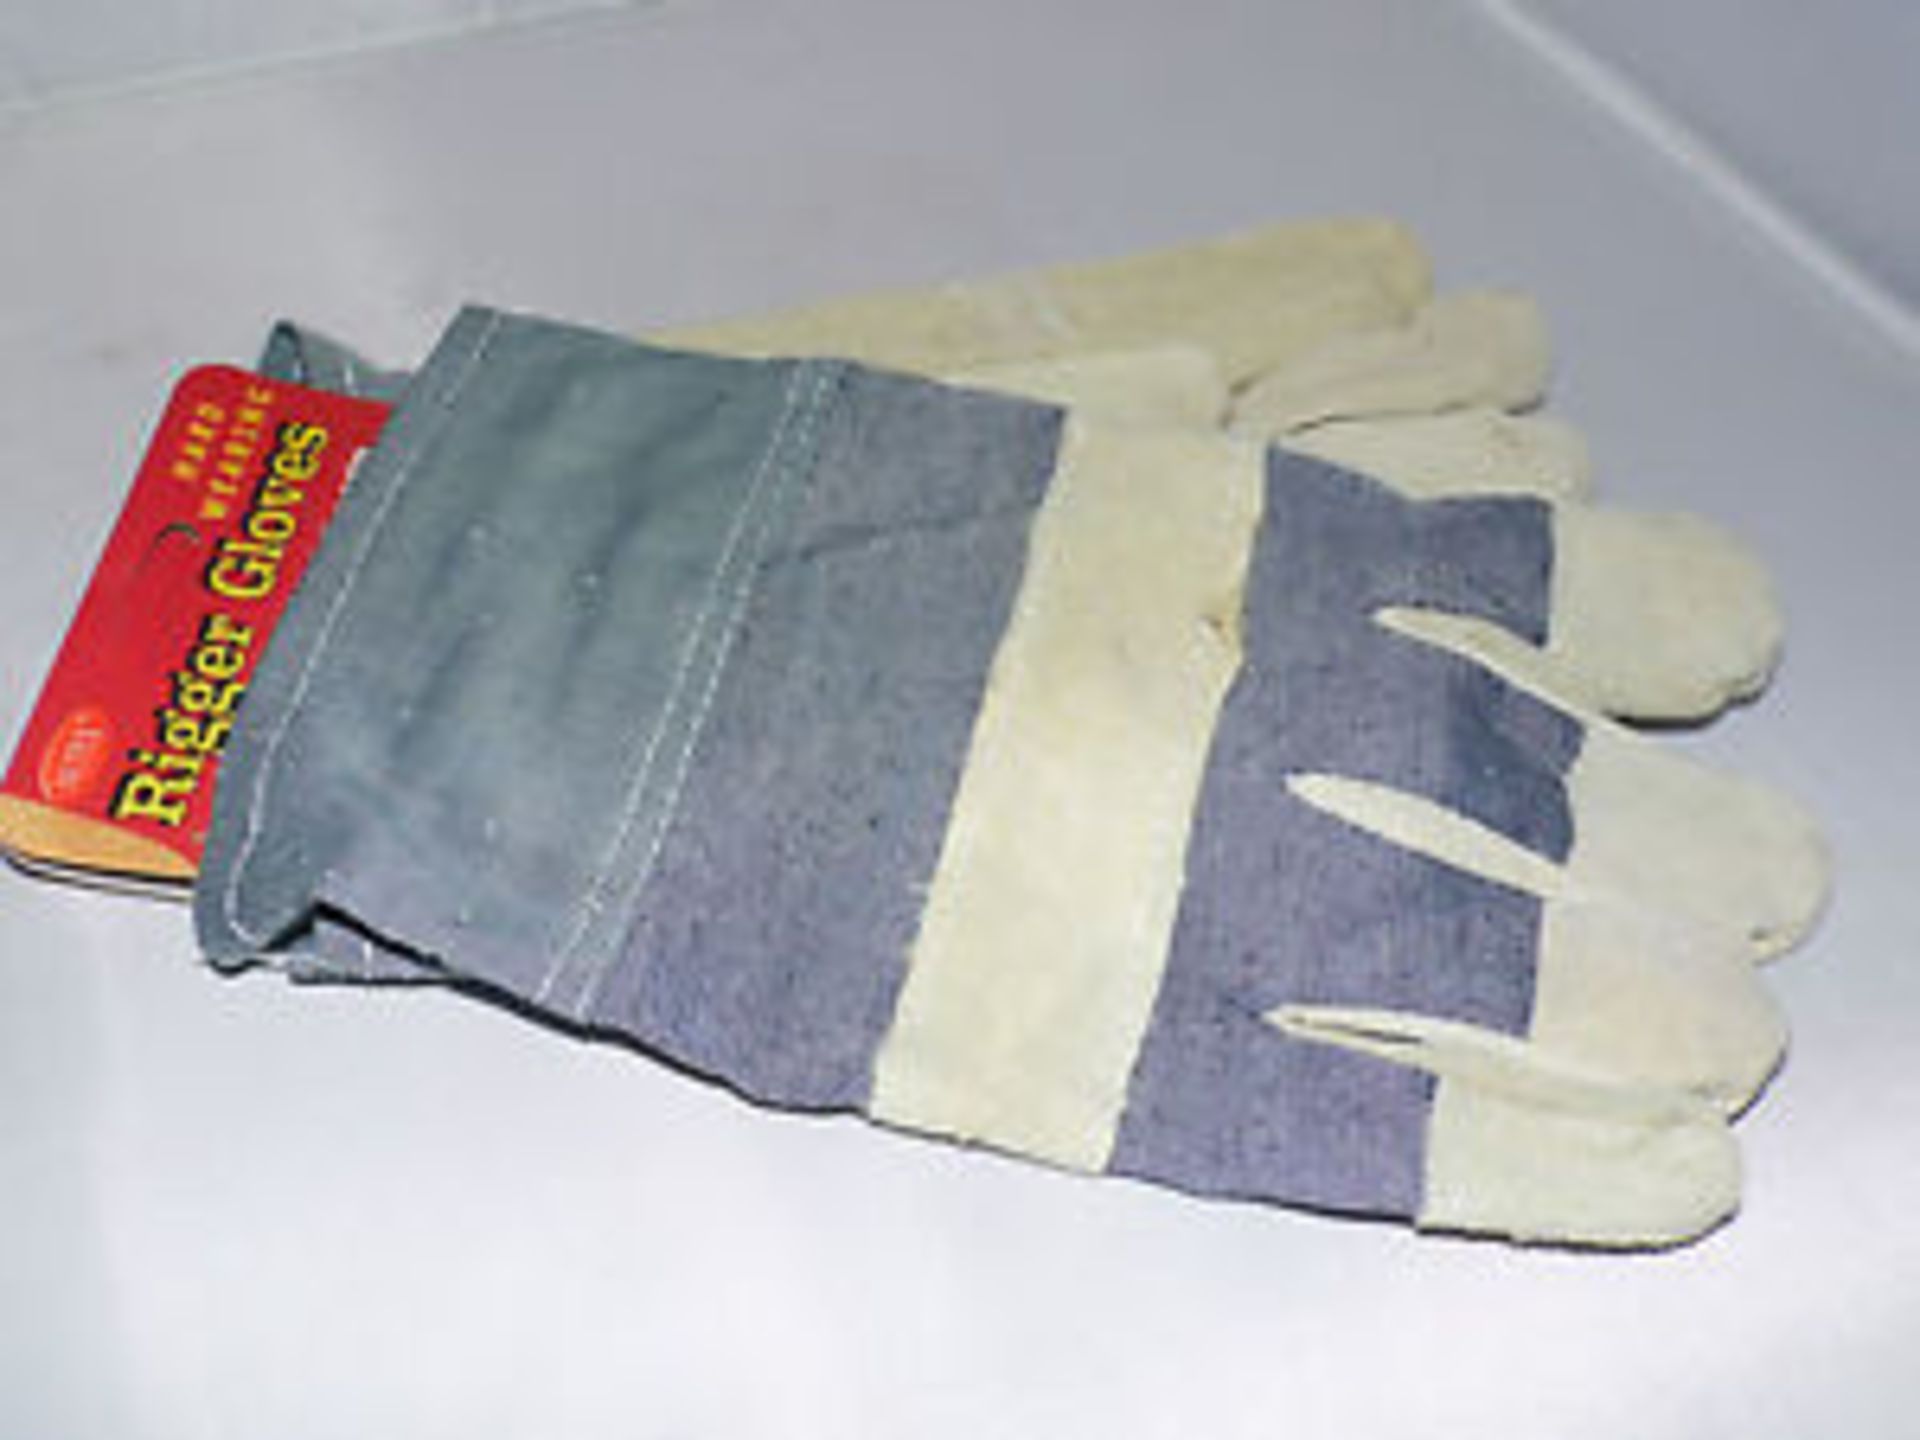 V *TRADE QTY* Brand New 12 Pairs Of Leather Rigger Gloves RRP £59.88 X 8 YOUR BID PRICE TO BE